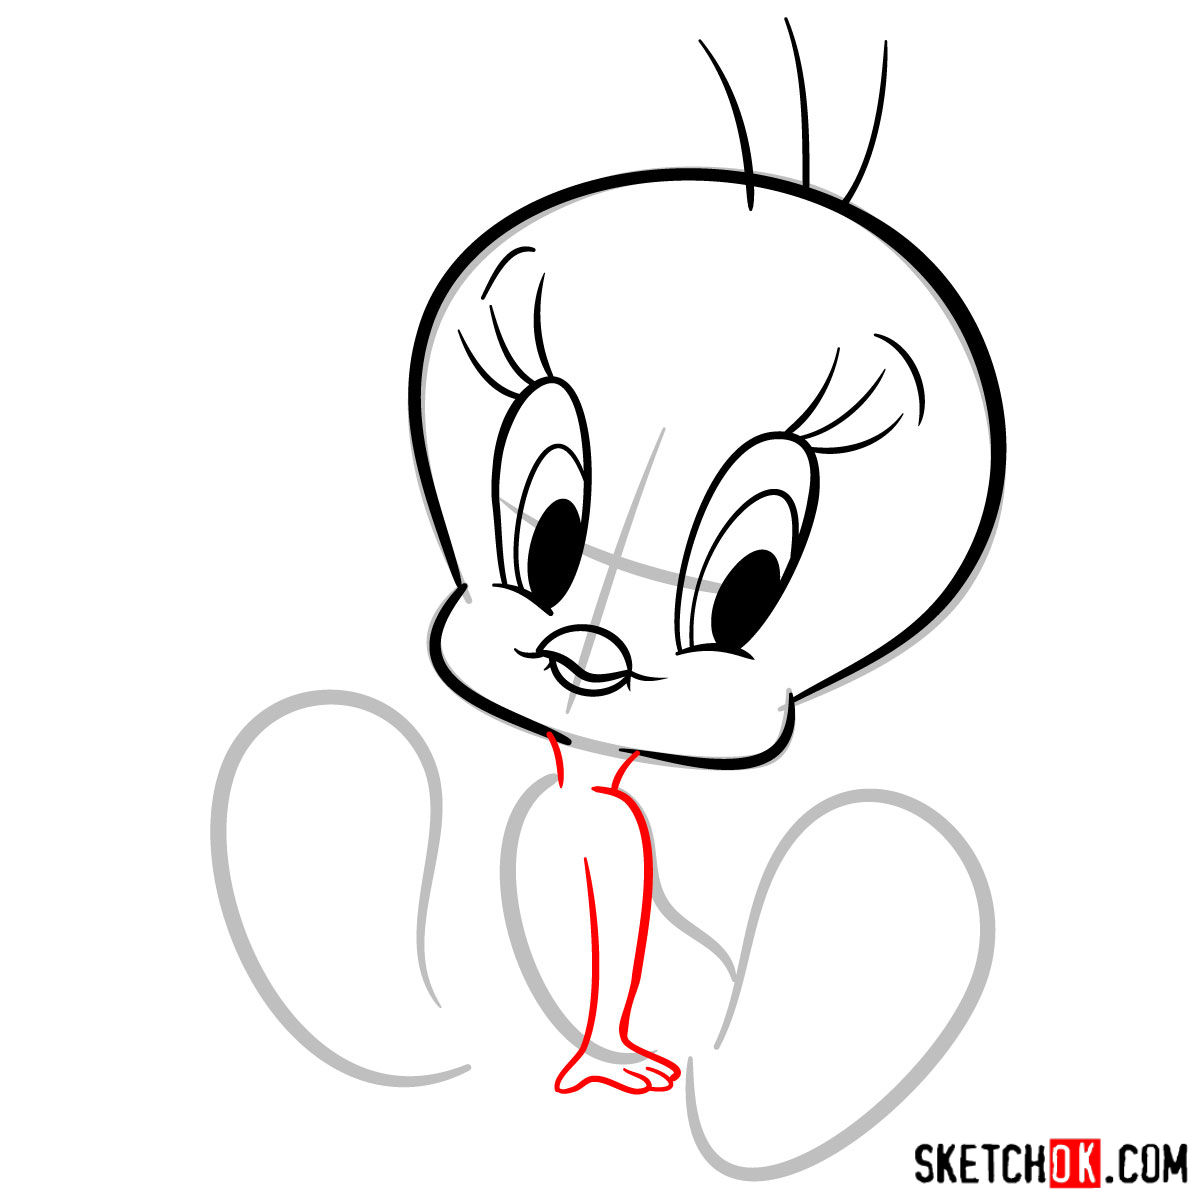 How to draw Tweety Bird - Sketchok easy drawing guides